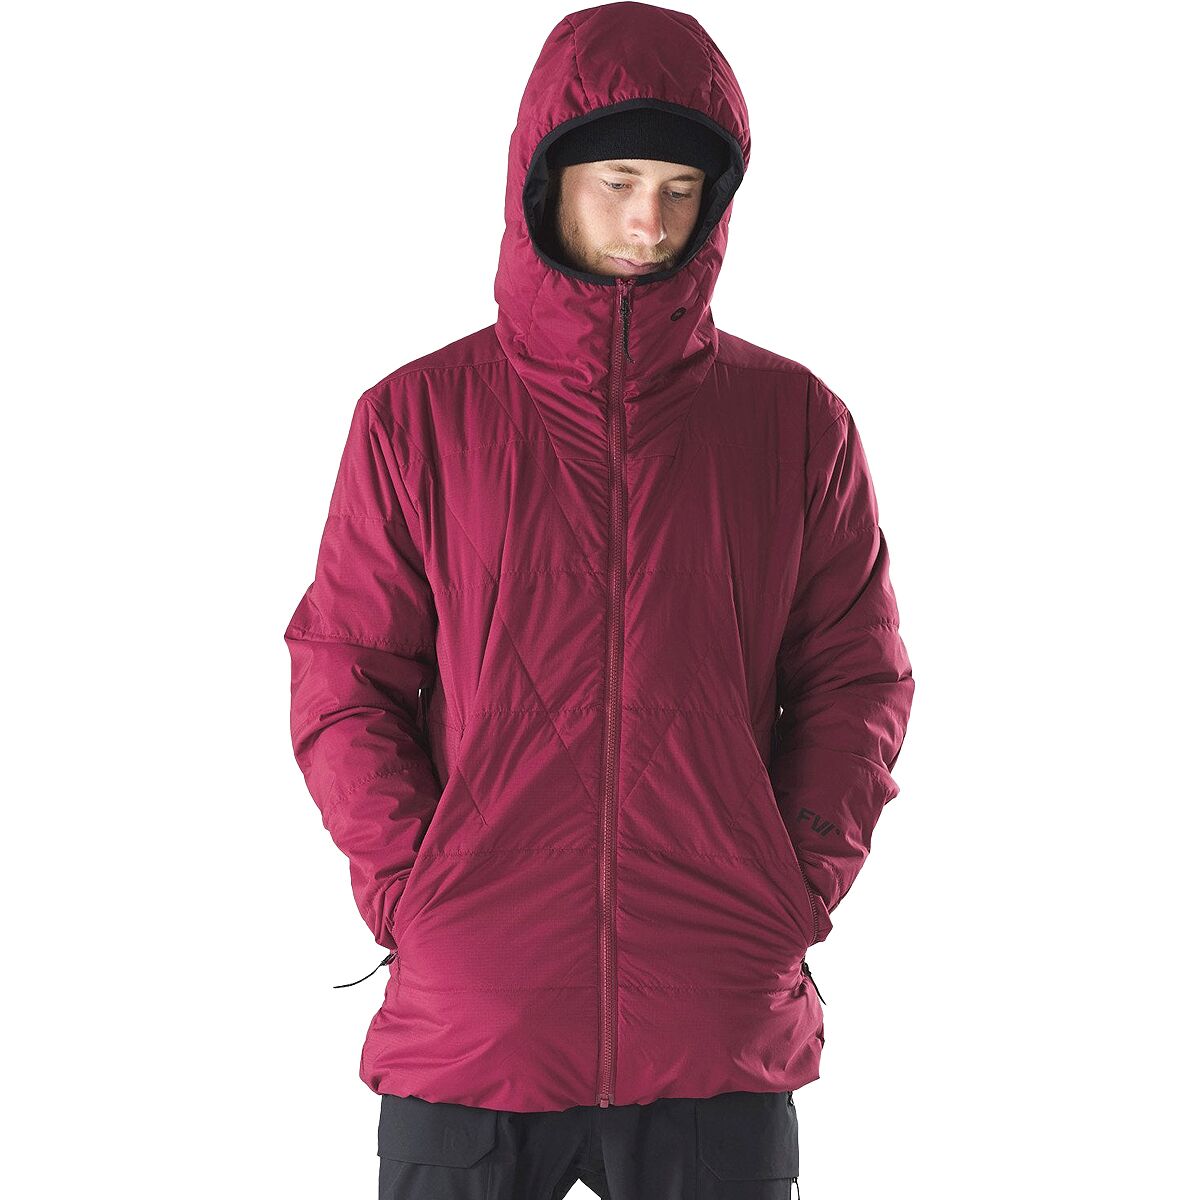 FW Apparel Manifest Quilted Hoodie - Men's